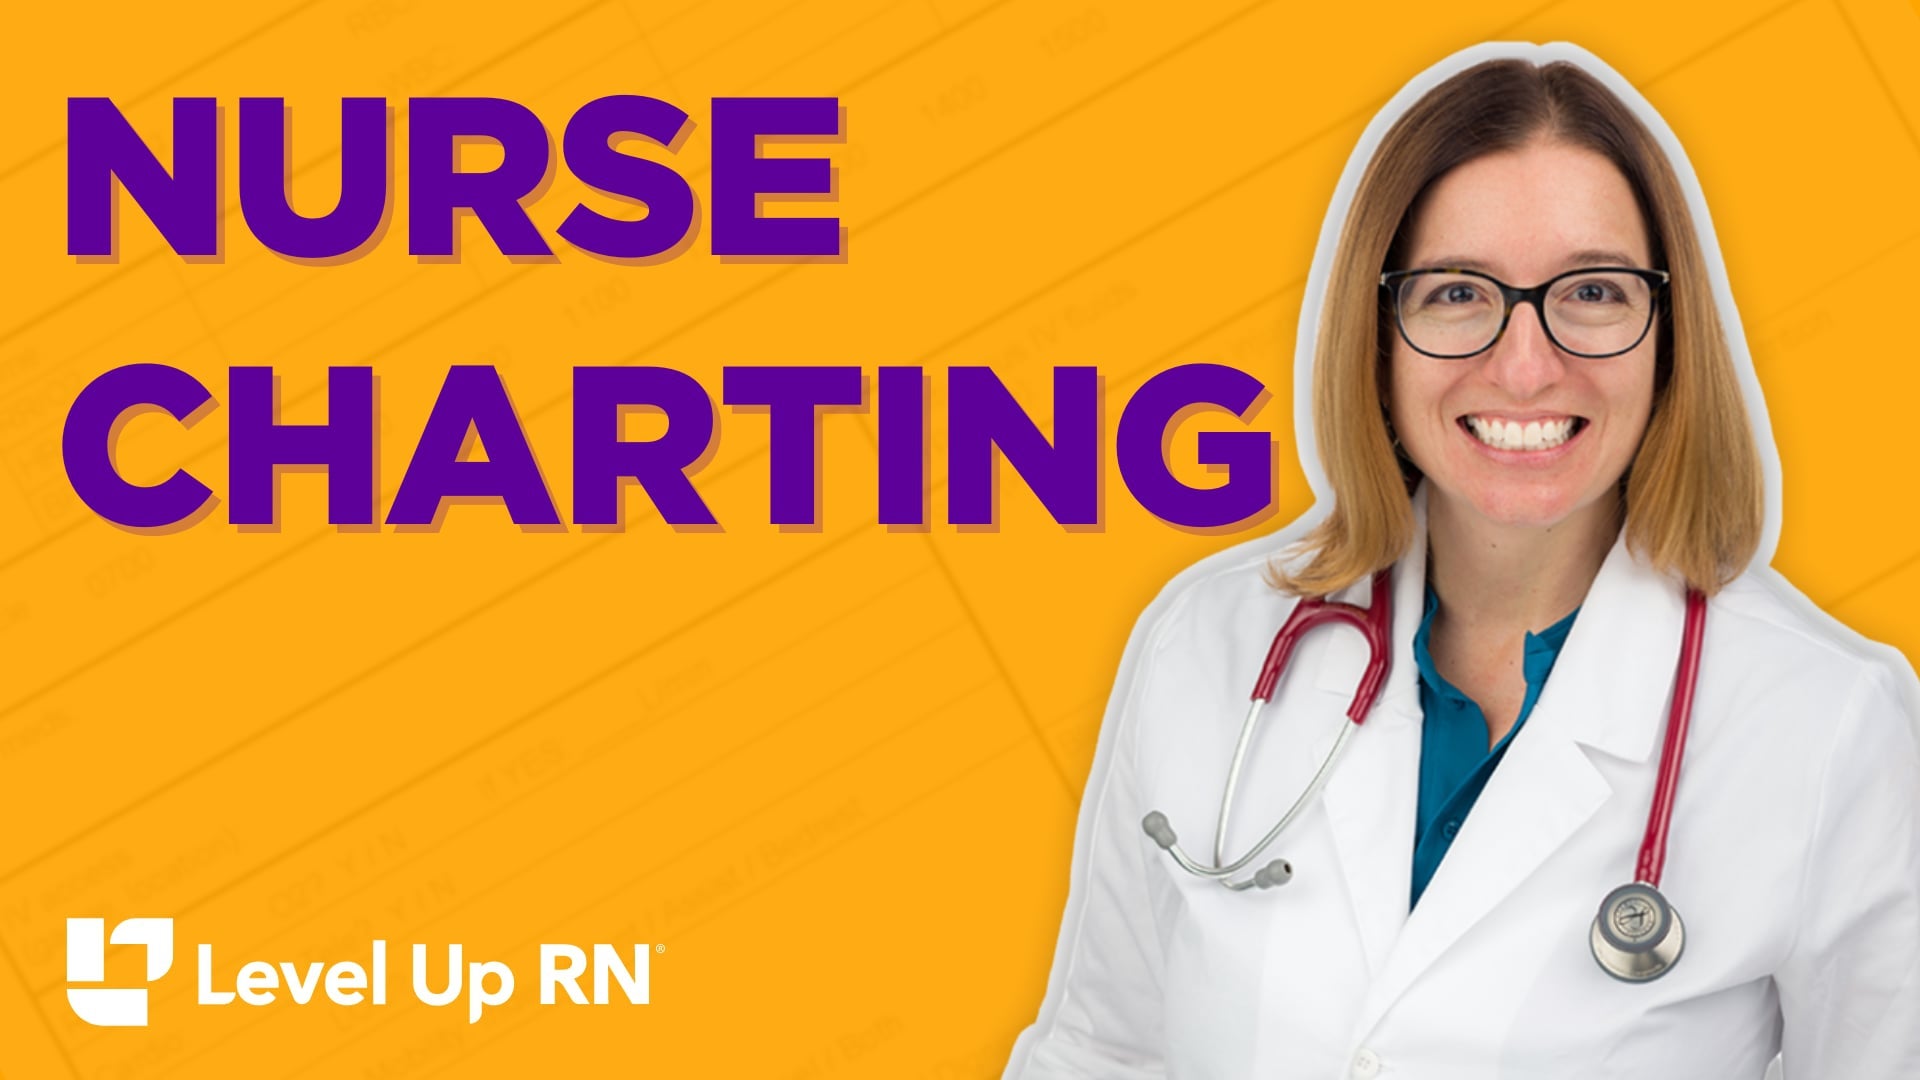 Nurse Charting - How to Chart Accurately - LevelUpRN